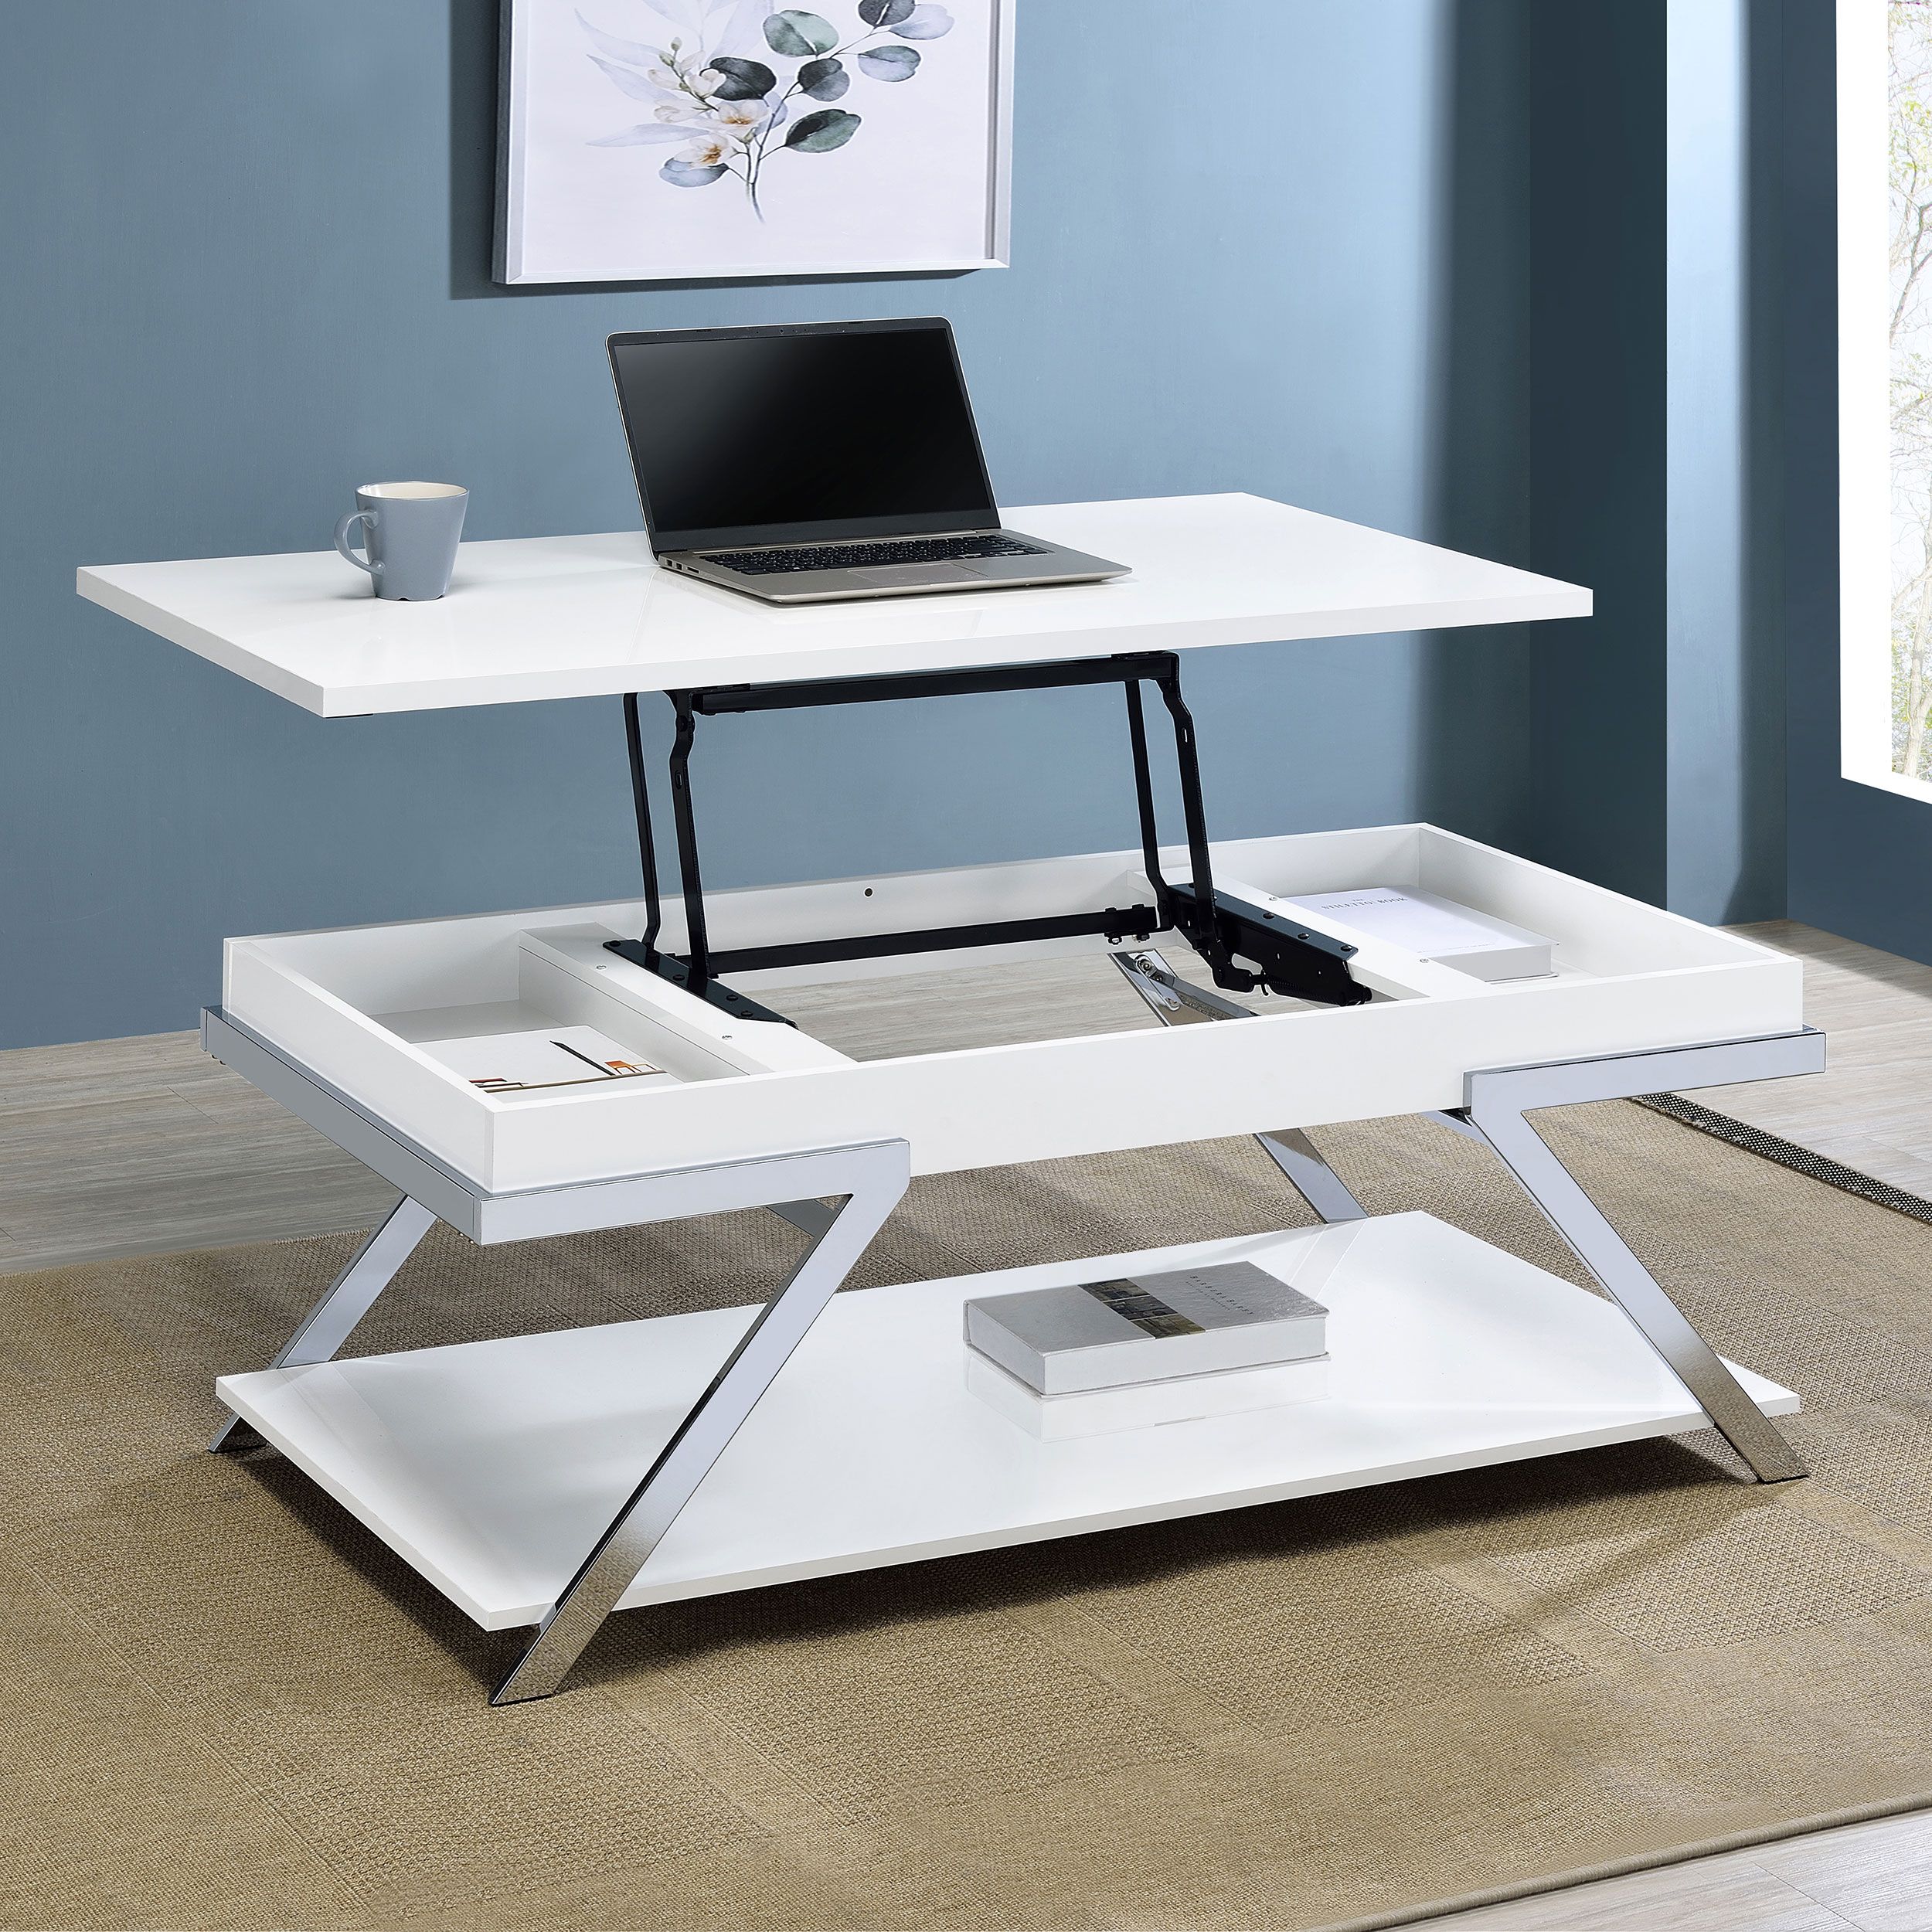 Marcia Wood Rectangular Lift Top Coffee Table White High Glo Within High Gloss Lift Top Coffee Tables (View 13 of 15)